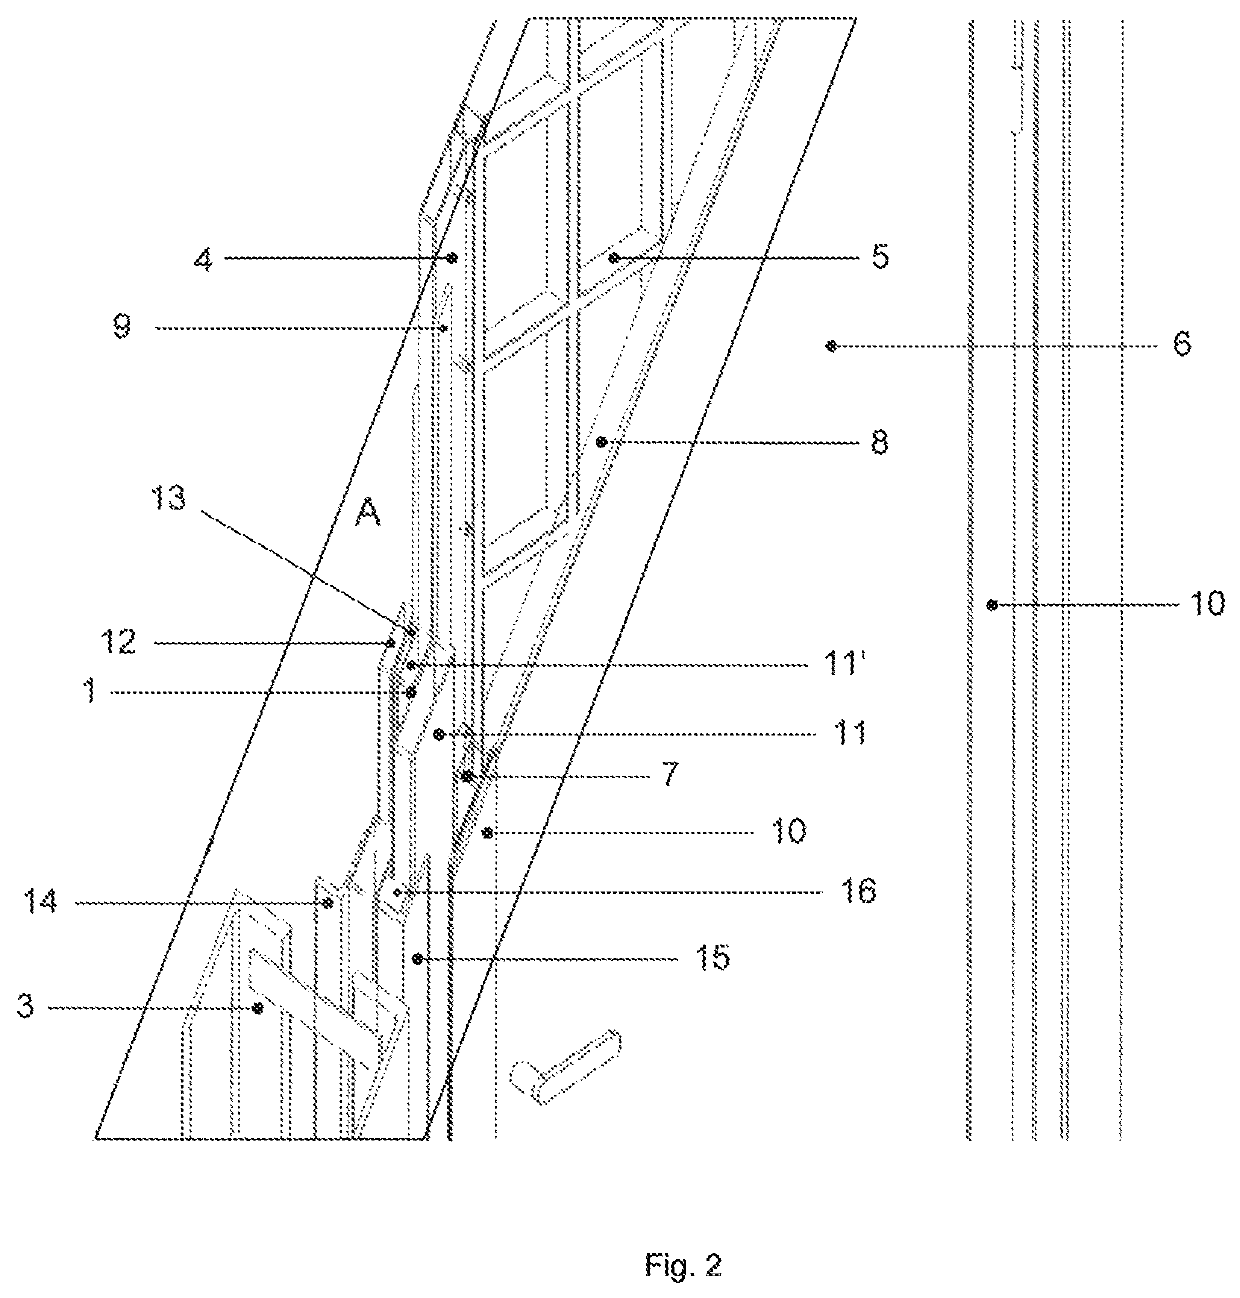 Fire-blast resistant door assembly and methods for installing the same